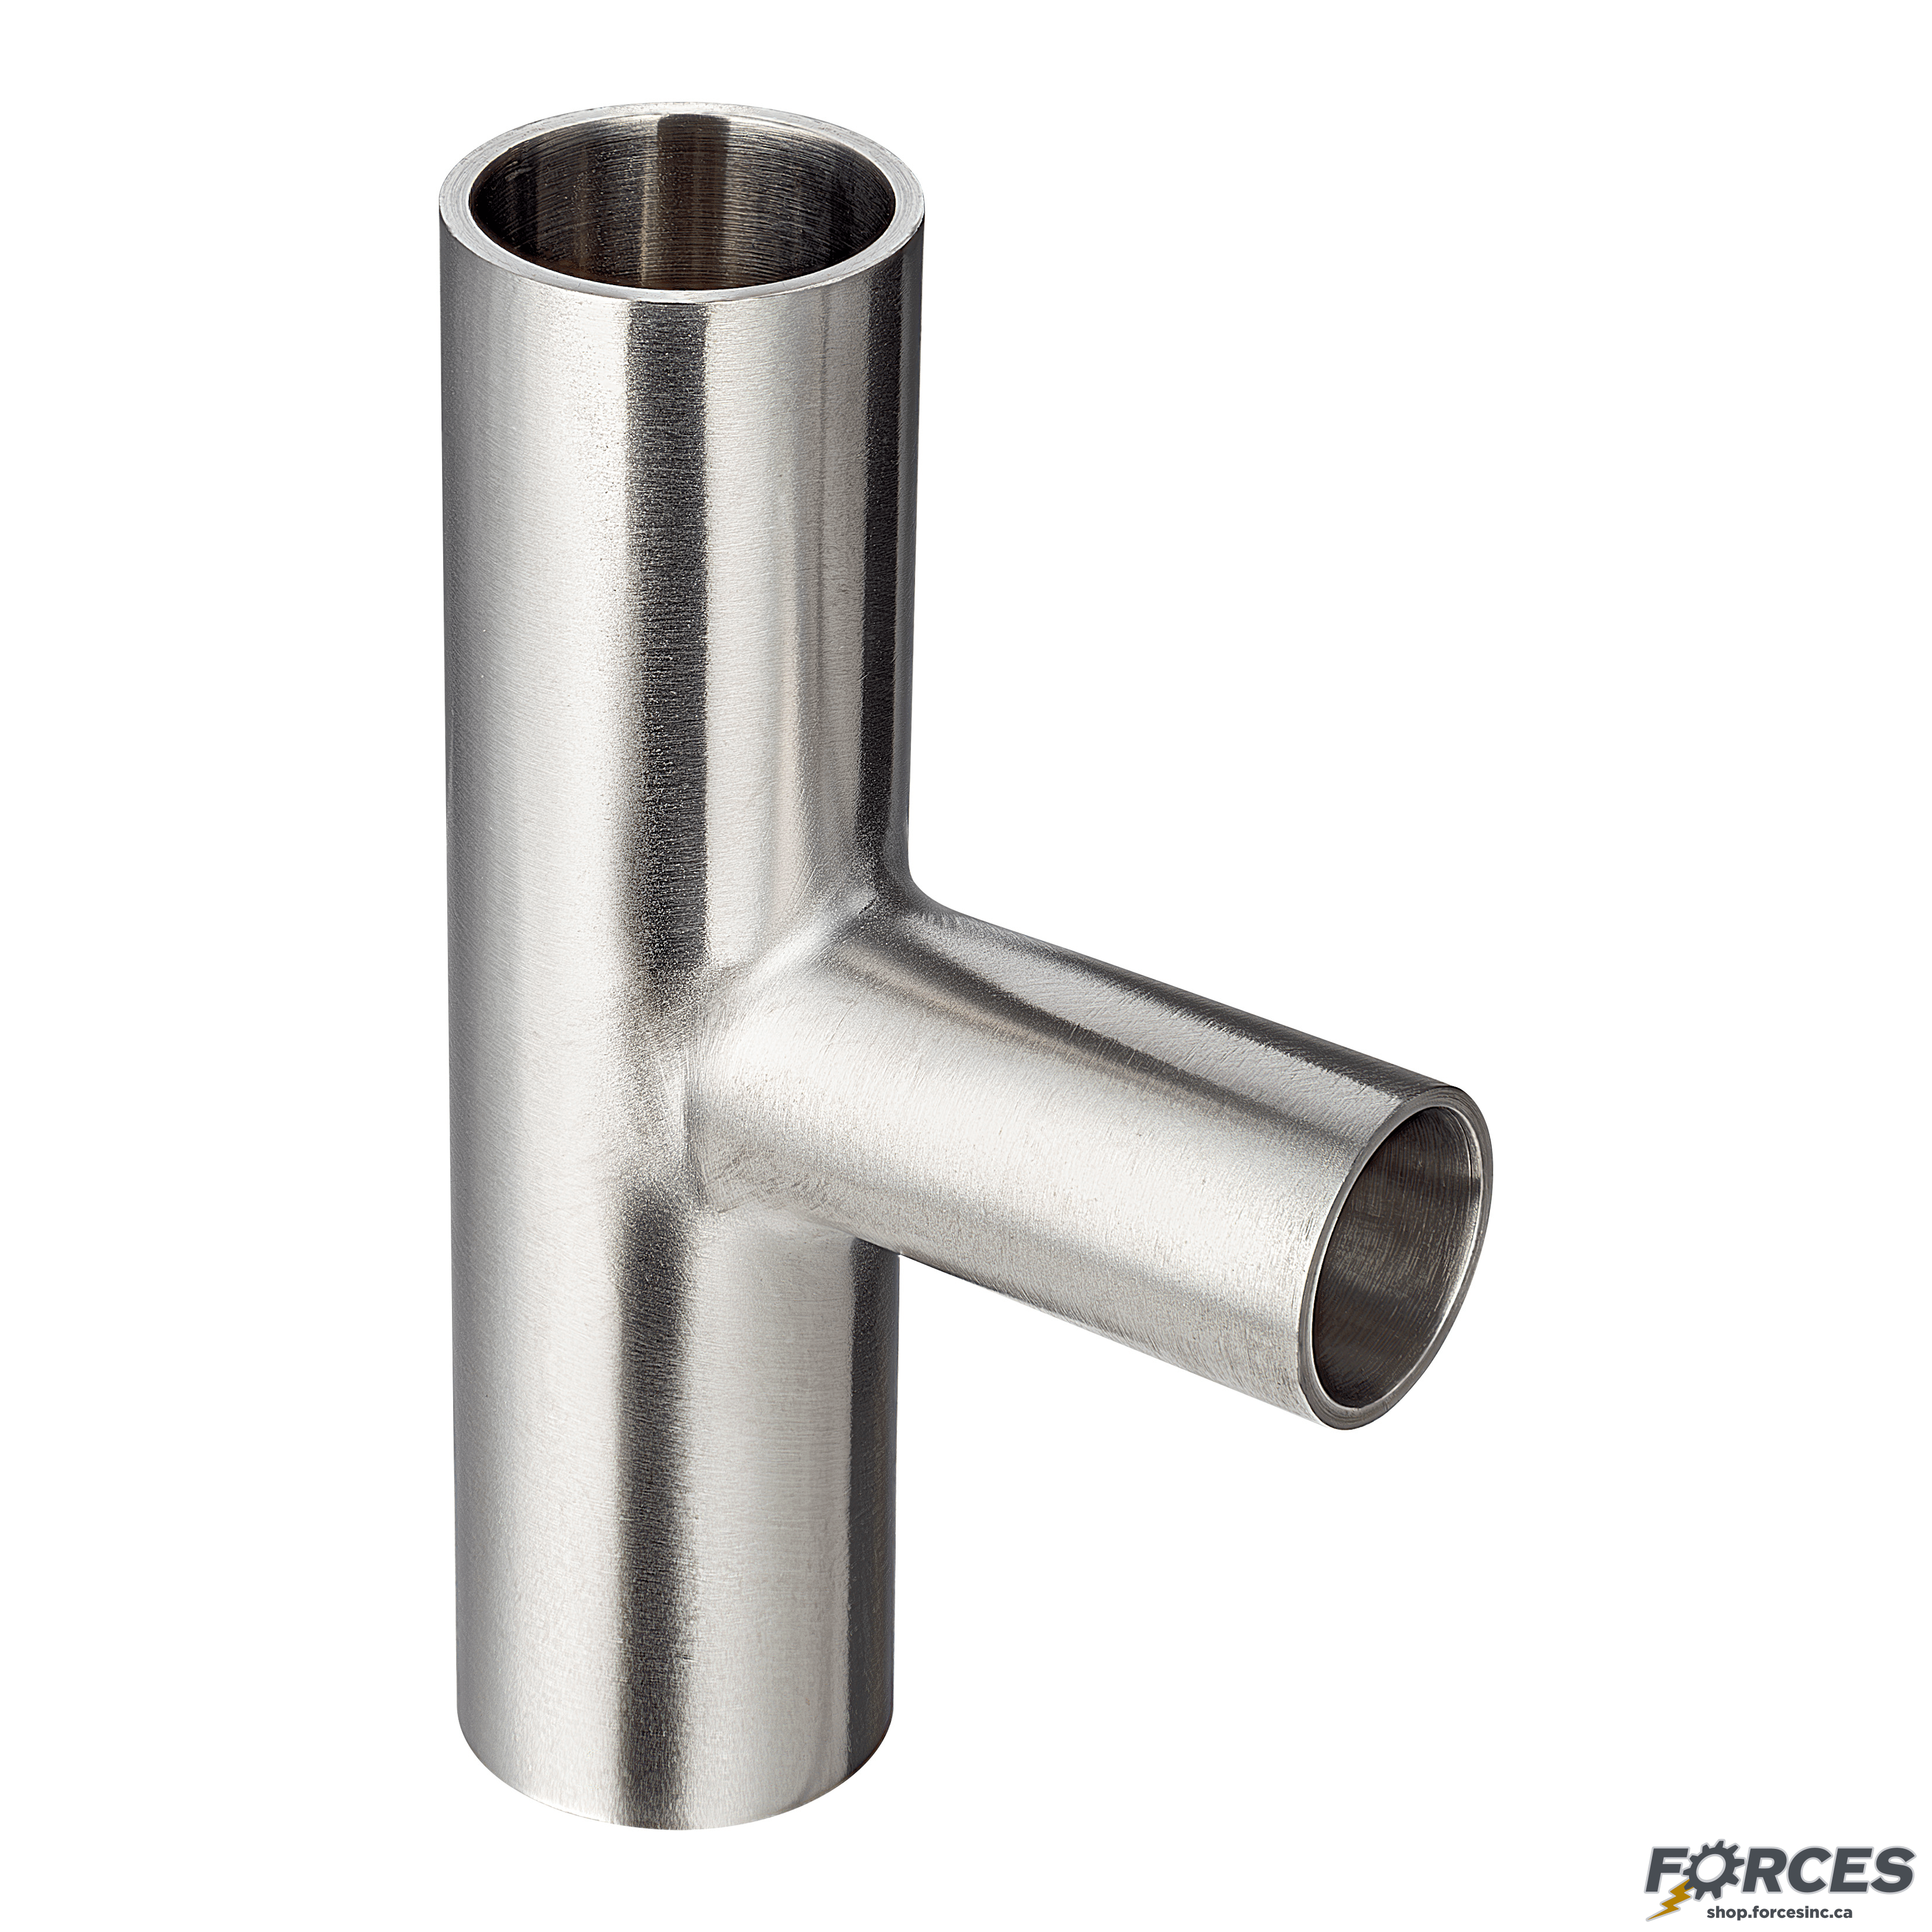 1-1/2" x 1" Butt Weld Tee Reducer - Stainless Steel 316 - Forces Inc